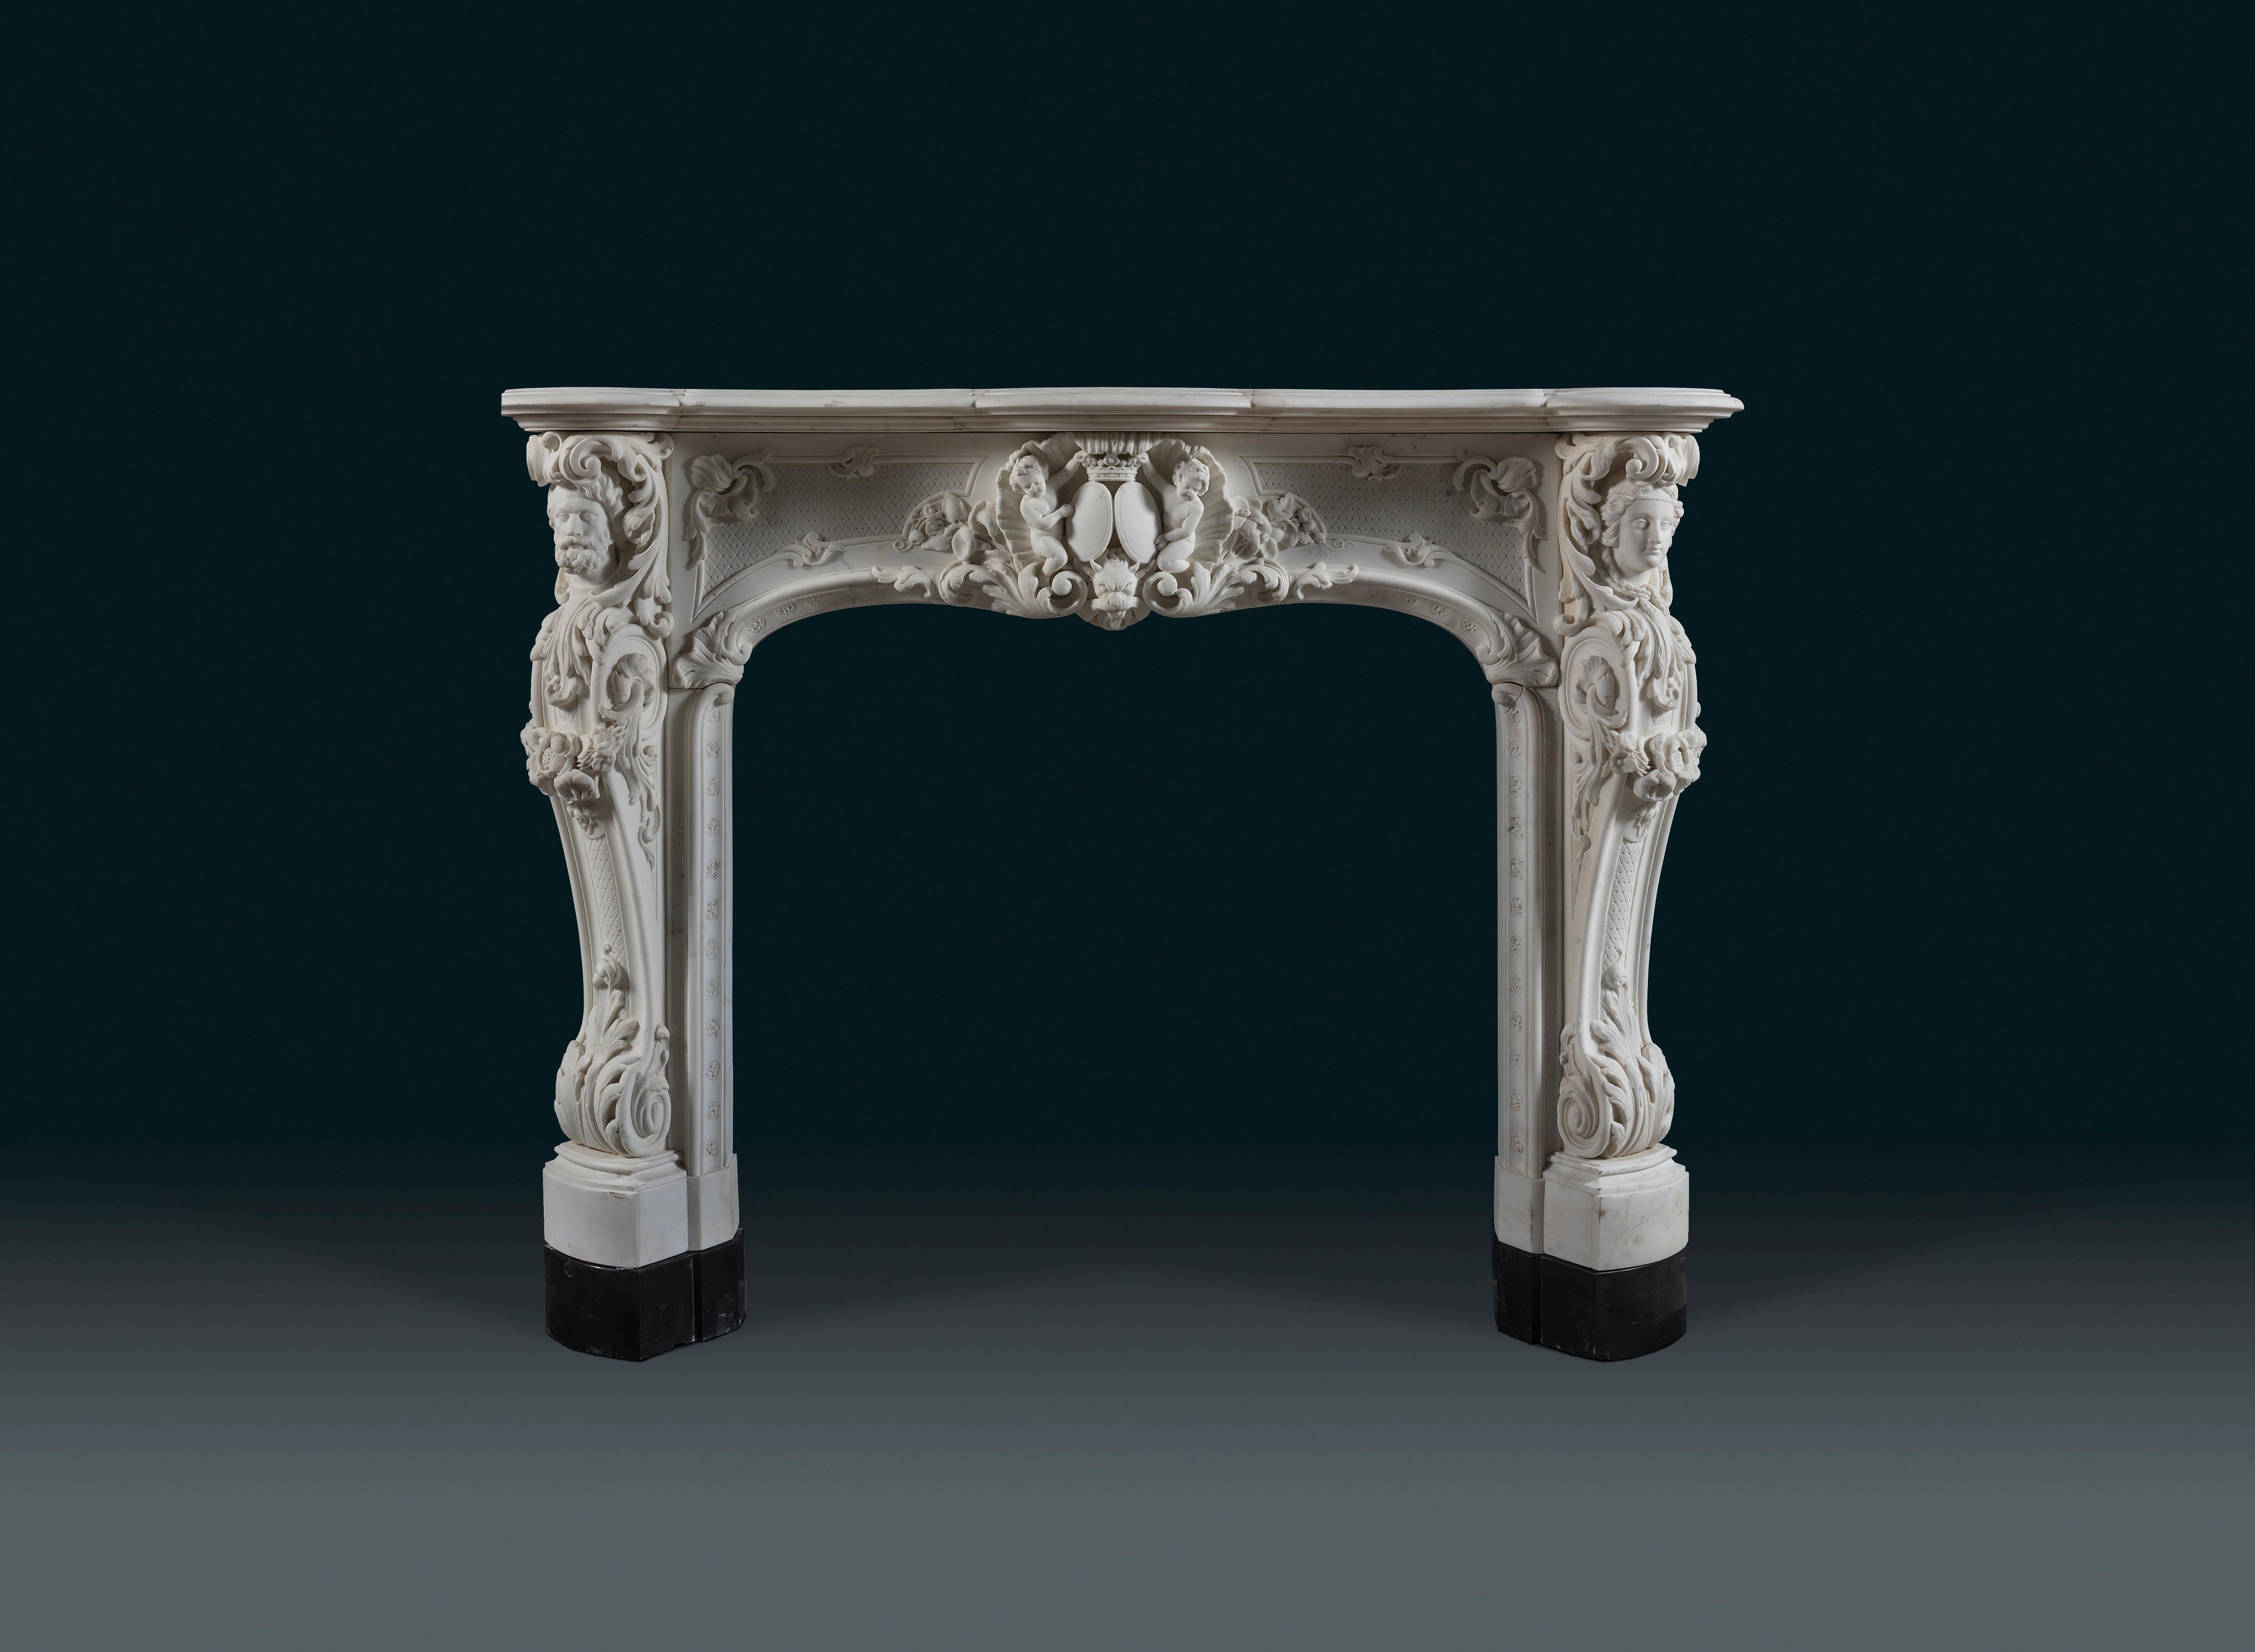 A 19th century, Louis XV style Statuary marble rococo chimneypiece. Each canted jamb is festooned with carved foliage ranging from great curls of acanthus to prim flowers. It is likely this chimneypiece is a celebration of conjugal love and unity,